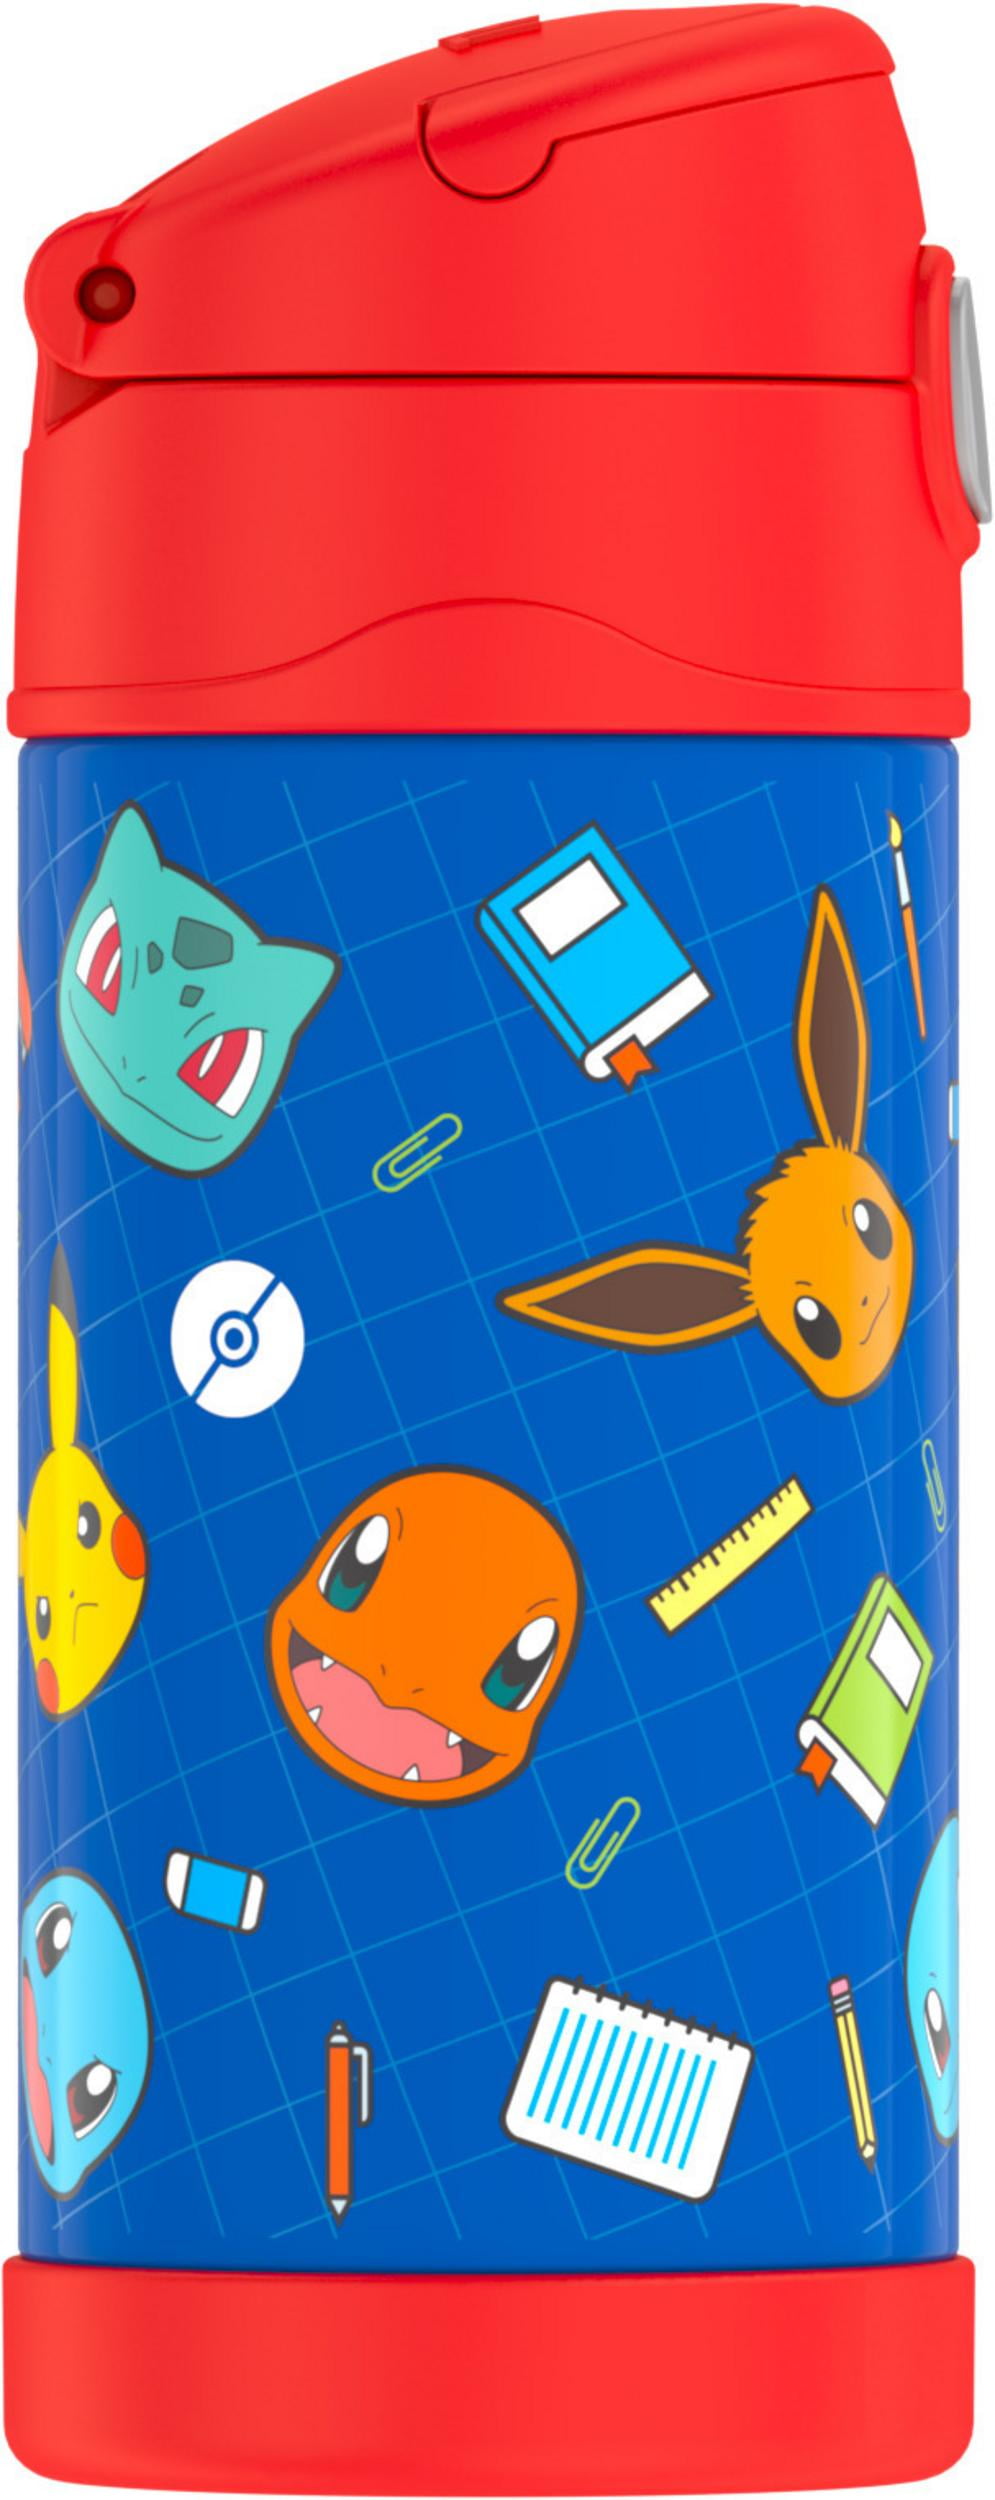 Thermos Funtainer 12-Oz Stainless Steel Vacuum Insulated Straw Bottle  (Pokemon) $11.91 (Reg. $19) - Lowest price in 30 days - Fabulessly Frugal